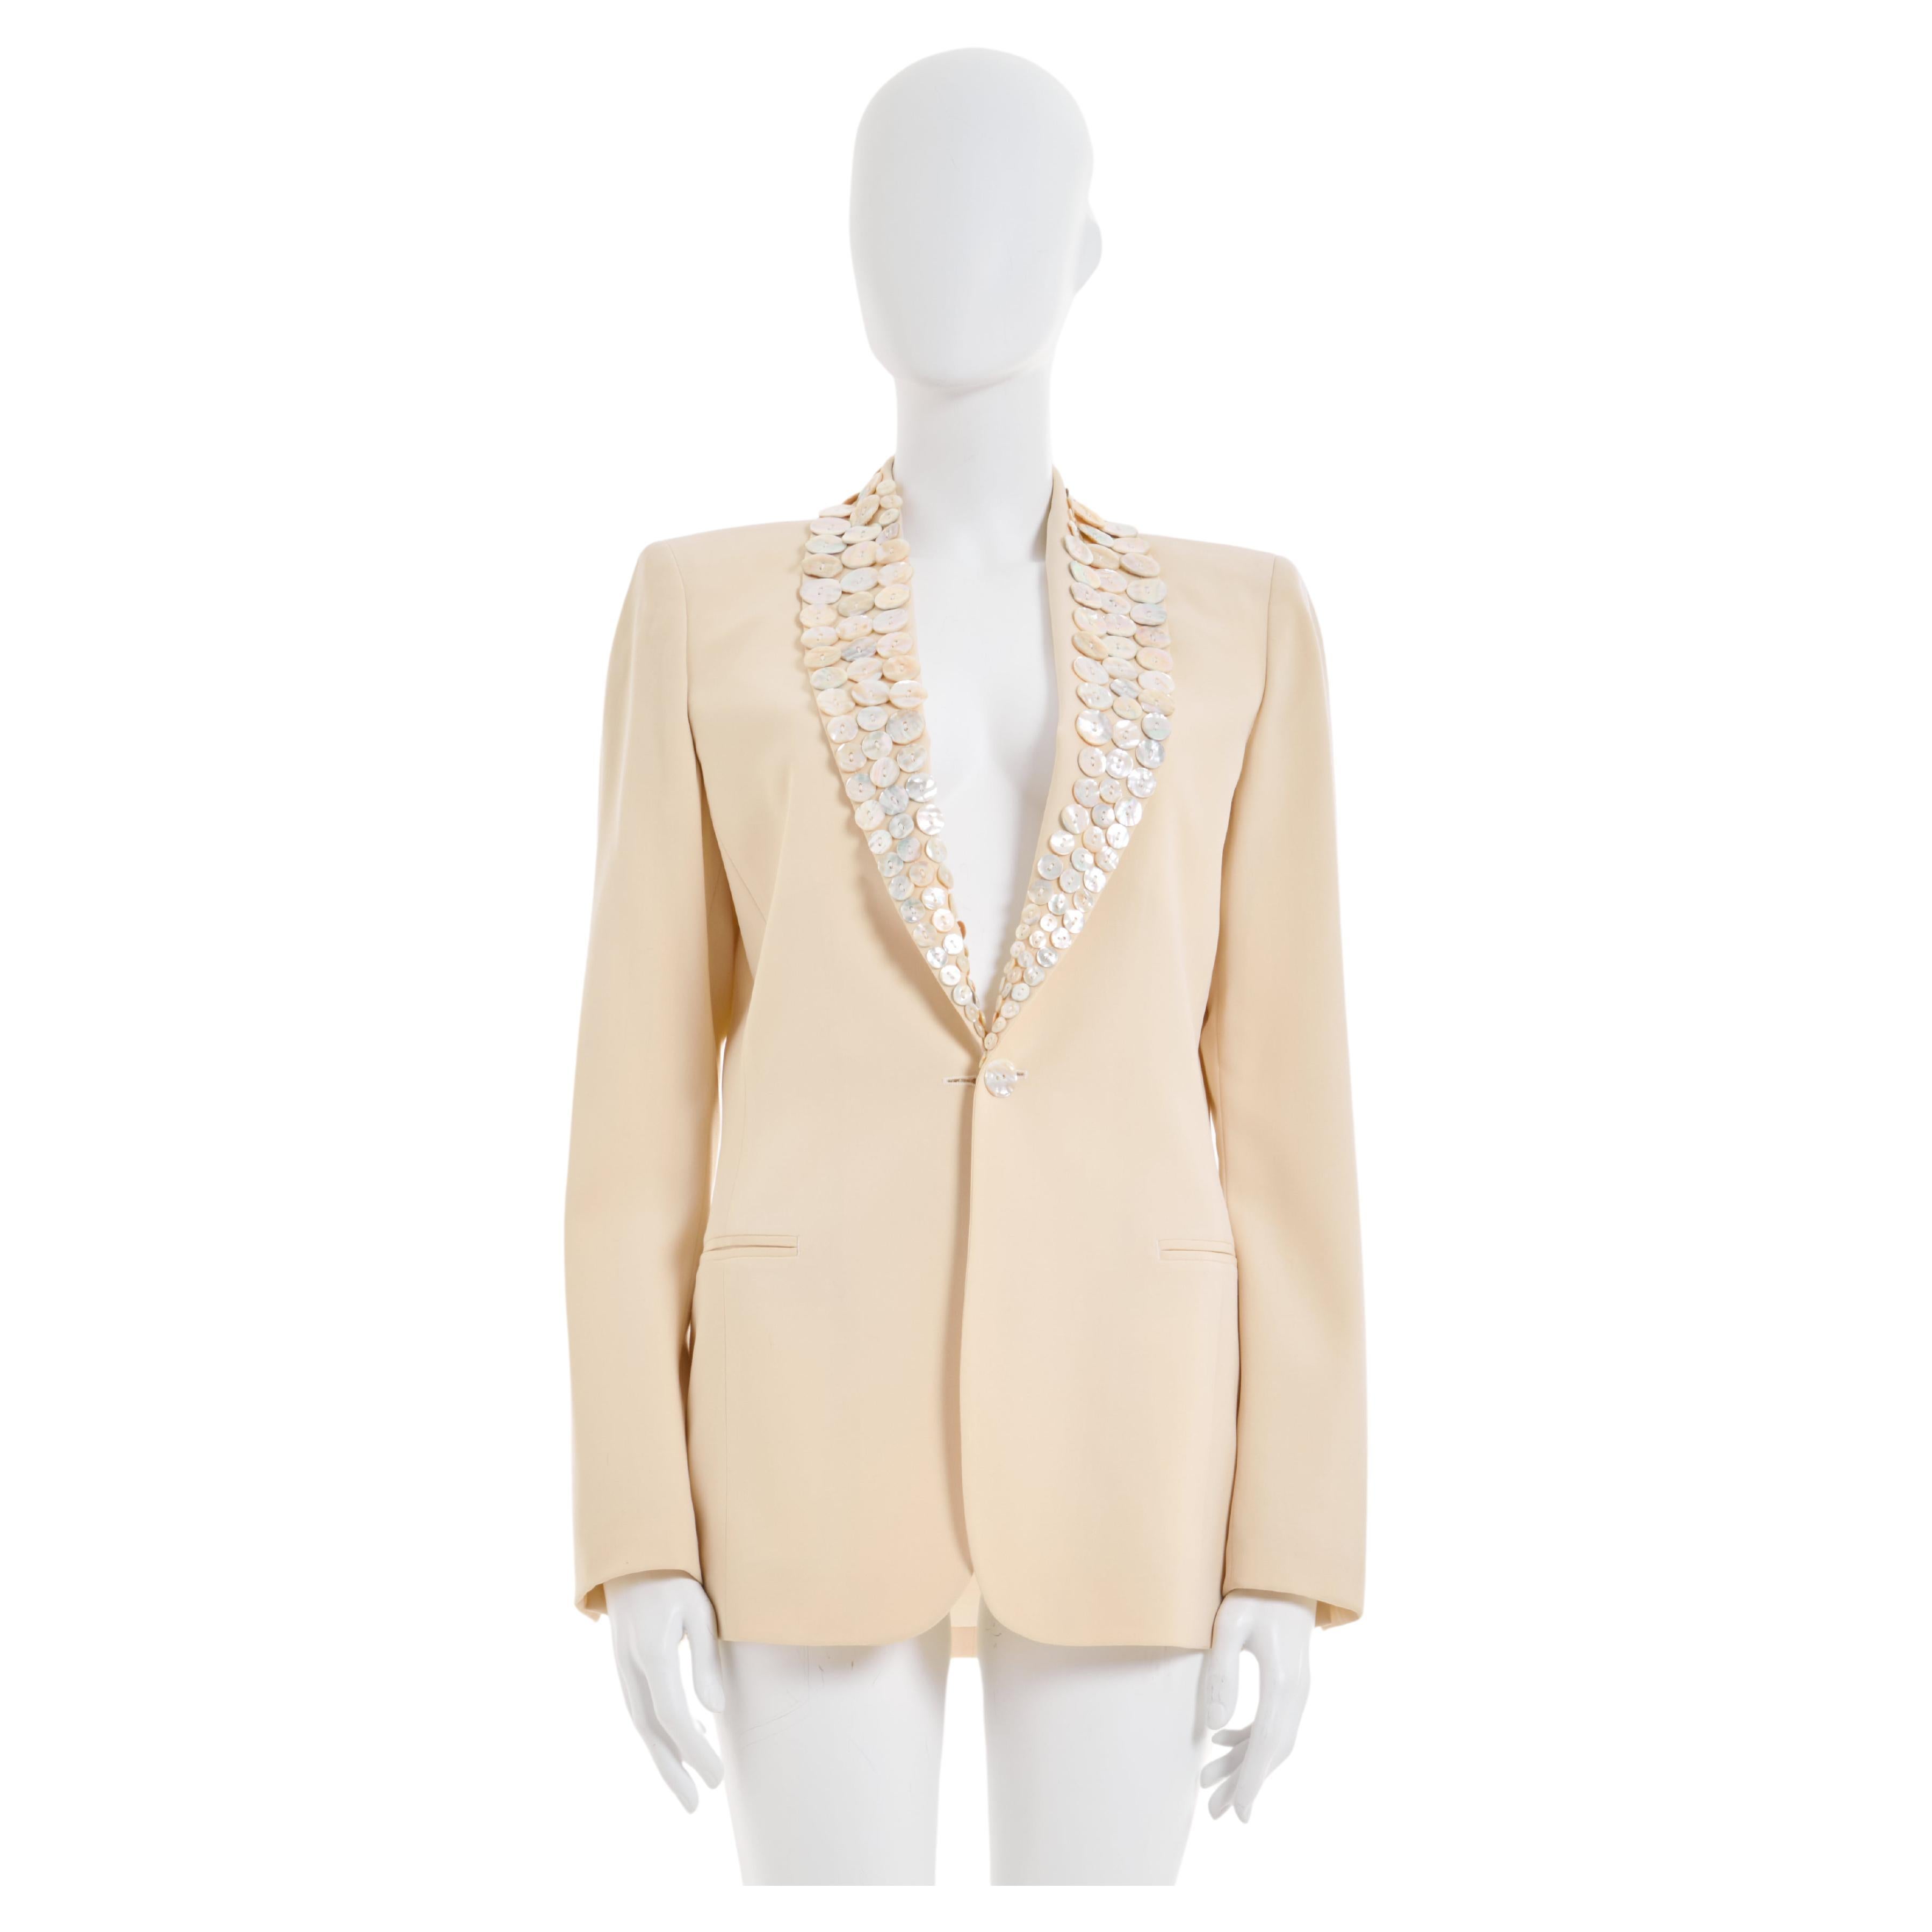 Jean Paul Gaultier Couture S/S 2003 mother of pearl button embellished jacket For Sale